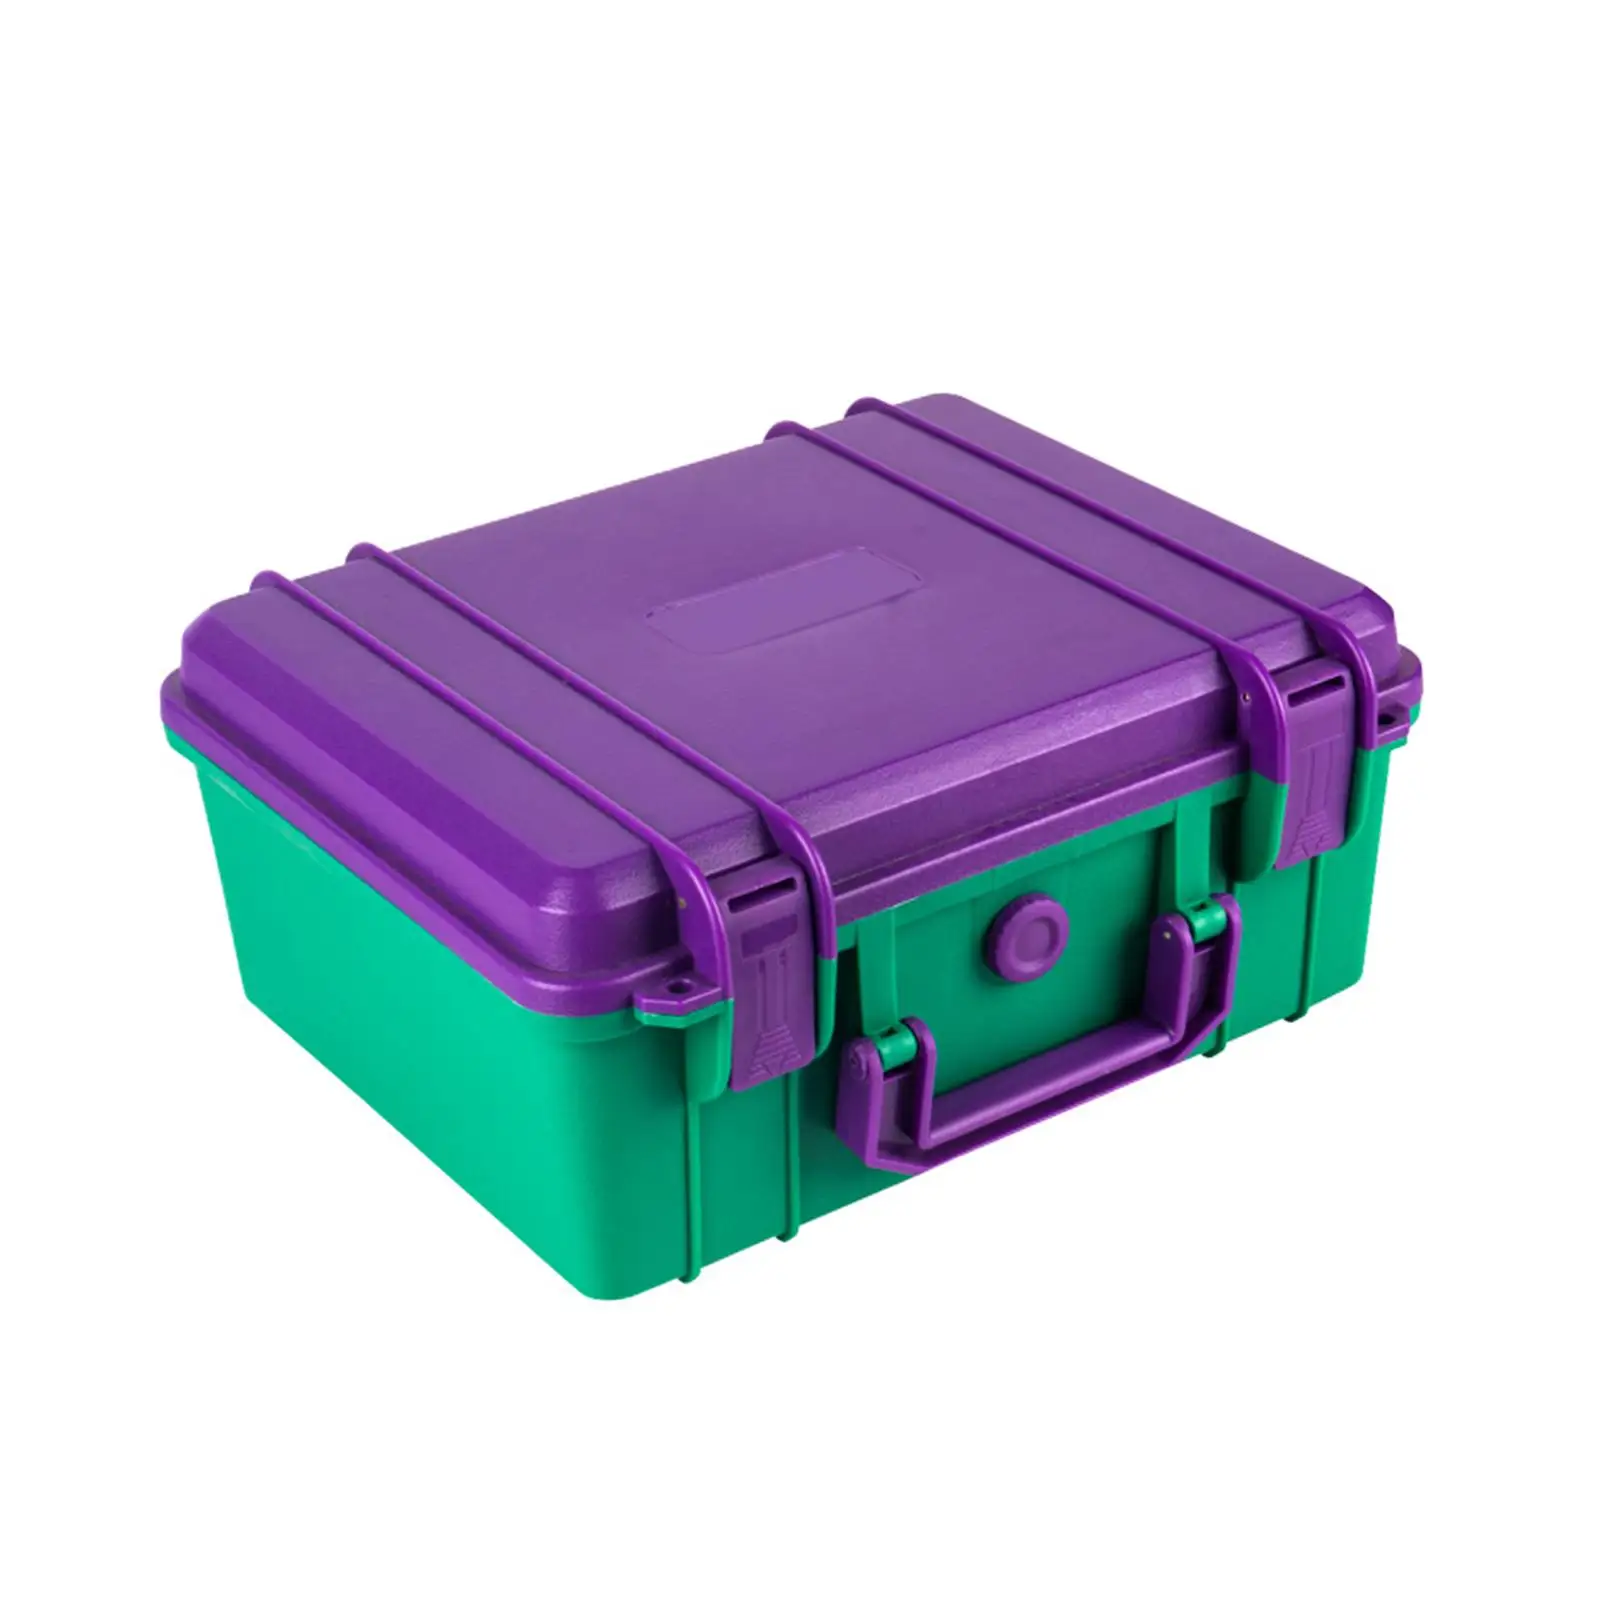 Protective Case Outdoor Camping Accessories Organizer Impact Resistant Portable Organization Violet and Green Safety Tool Case